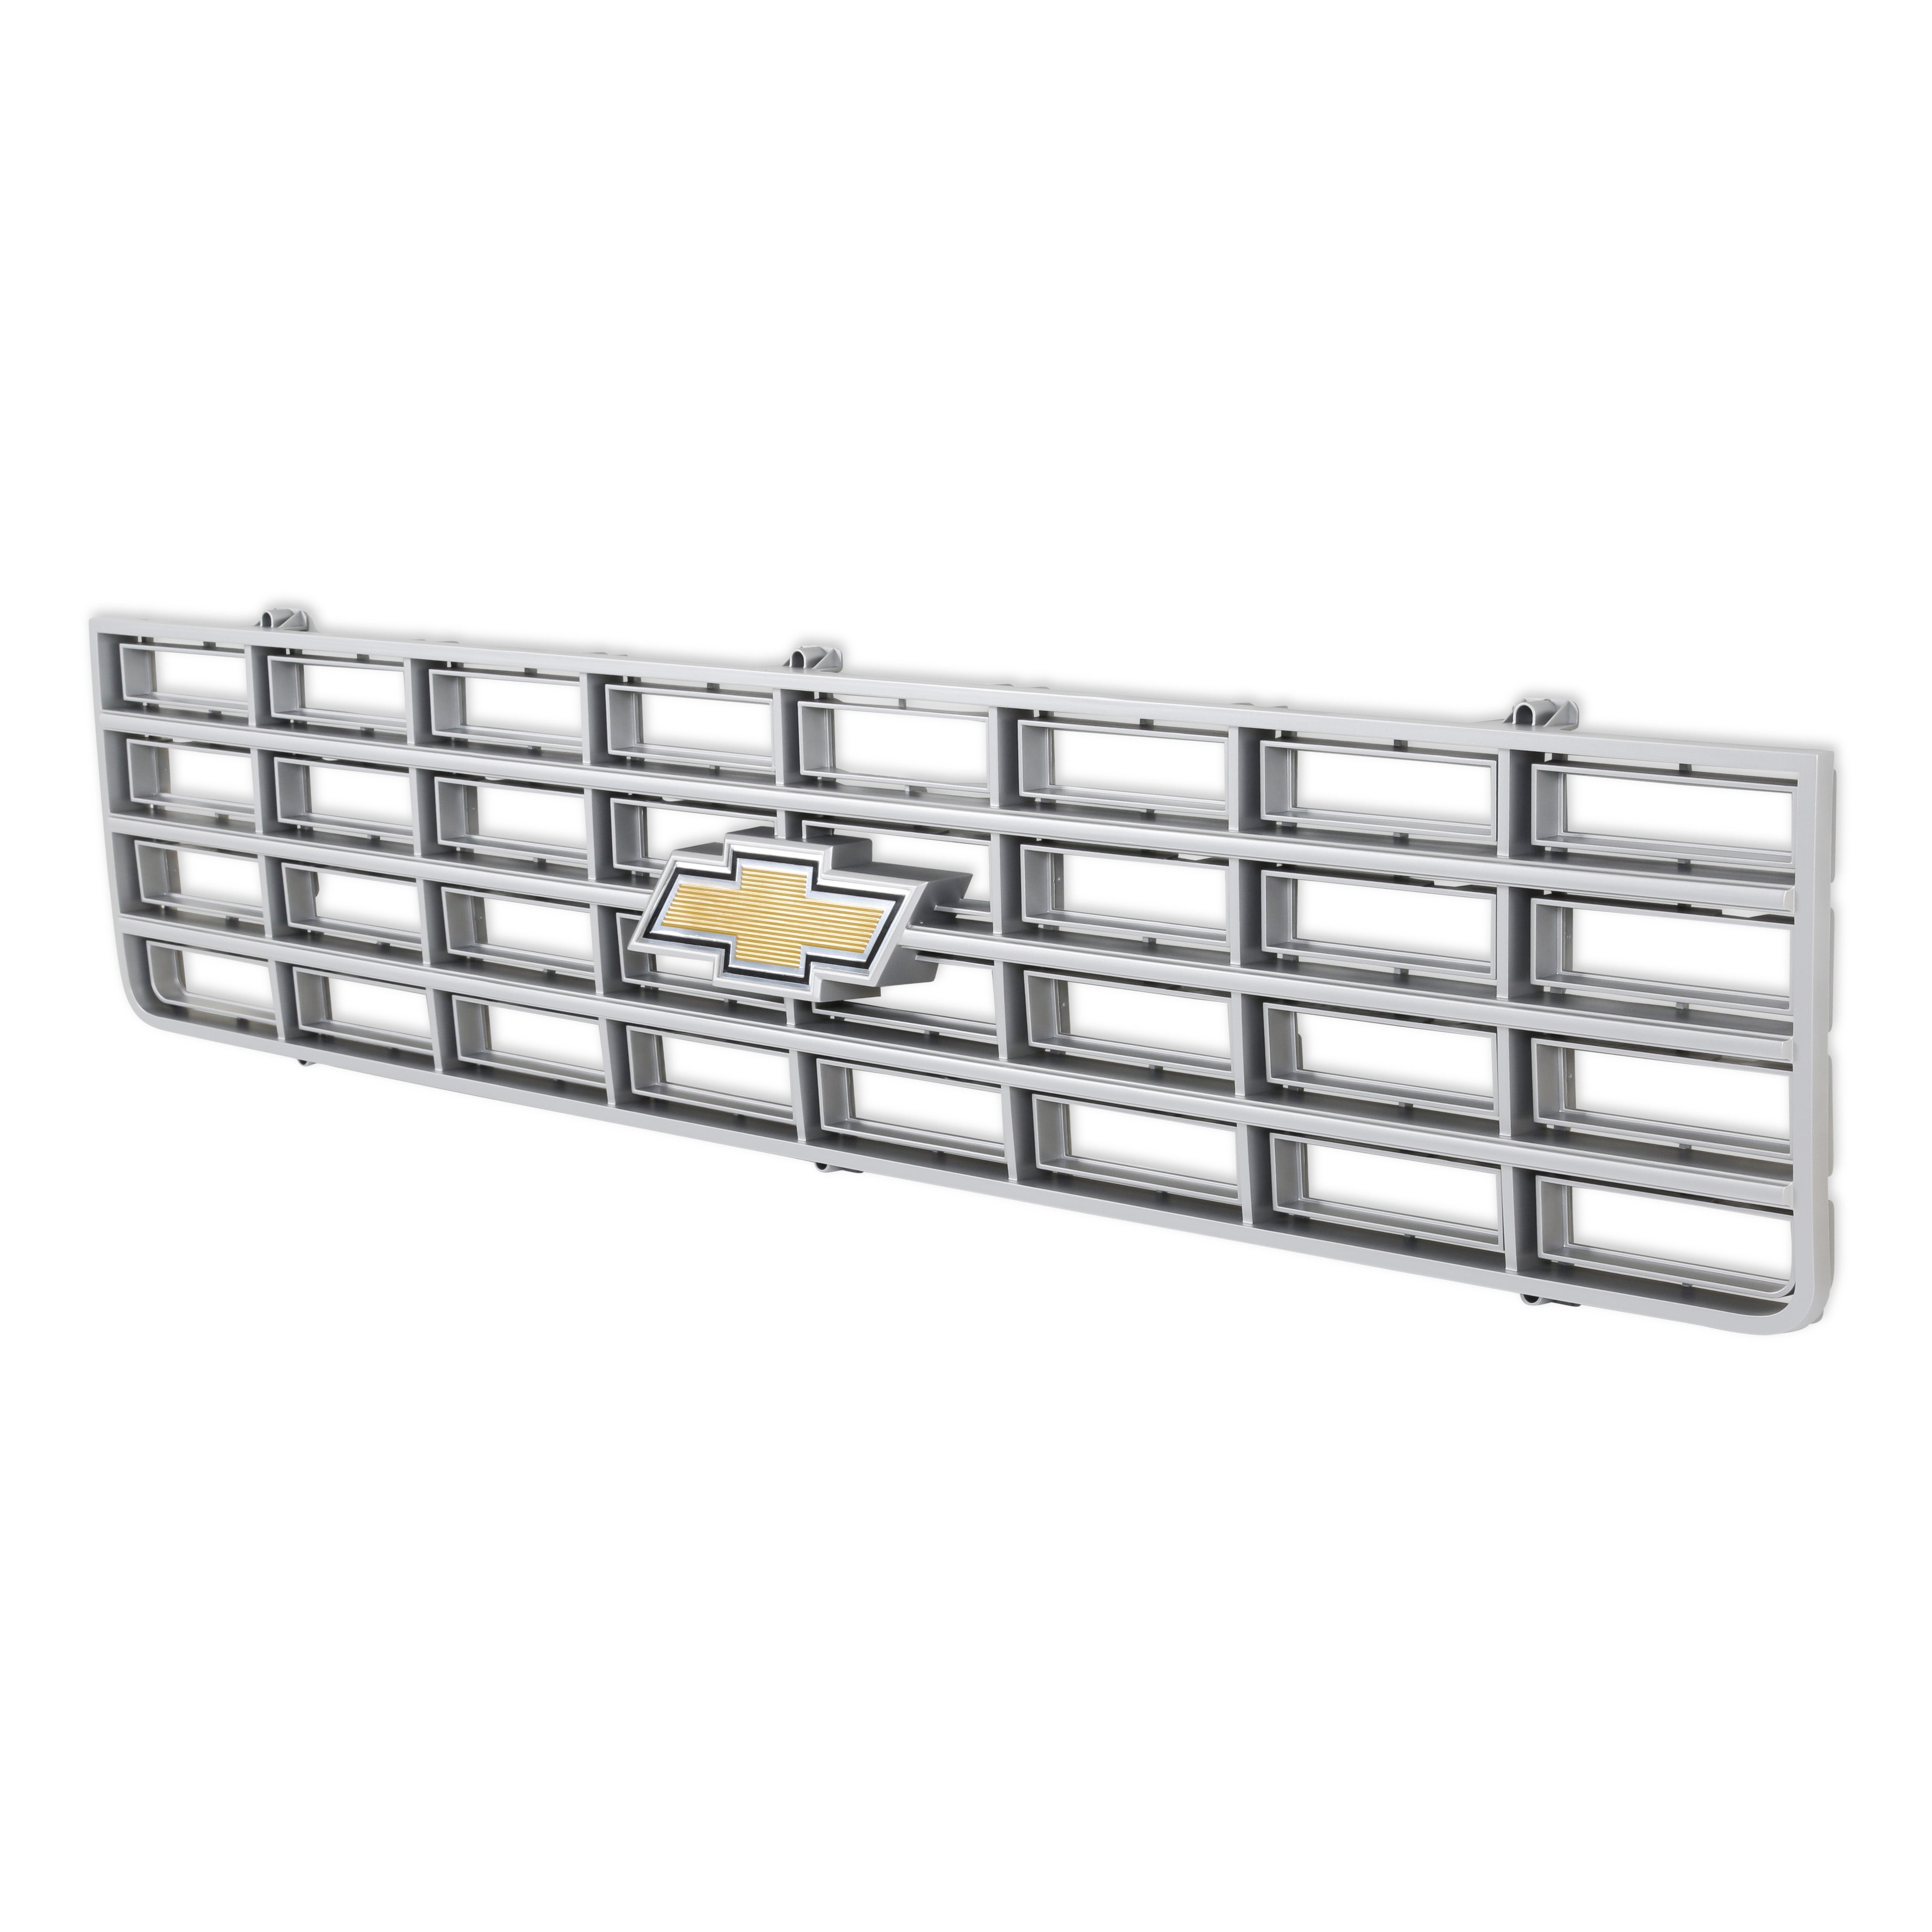 BROTHERS C/K Chevy Grille - w/ Bowtie - Silver pn 04-169